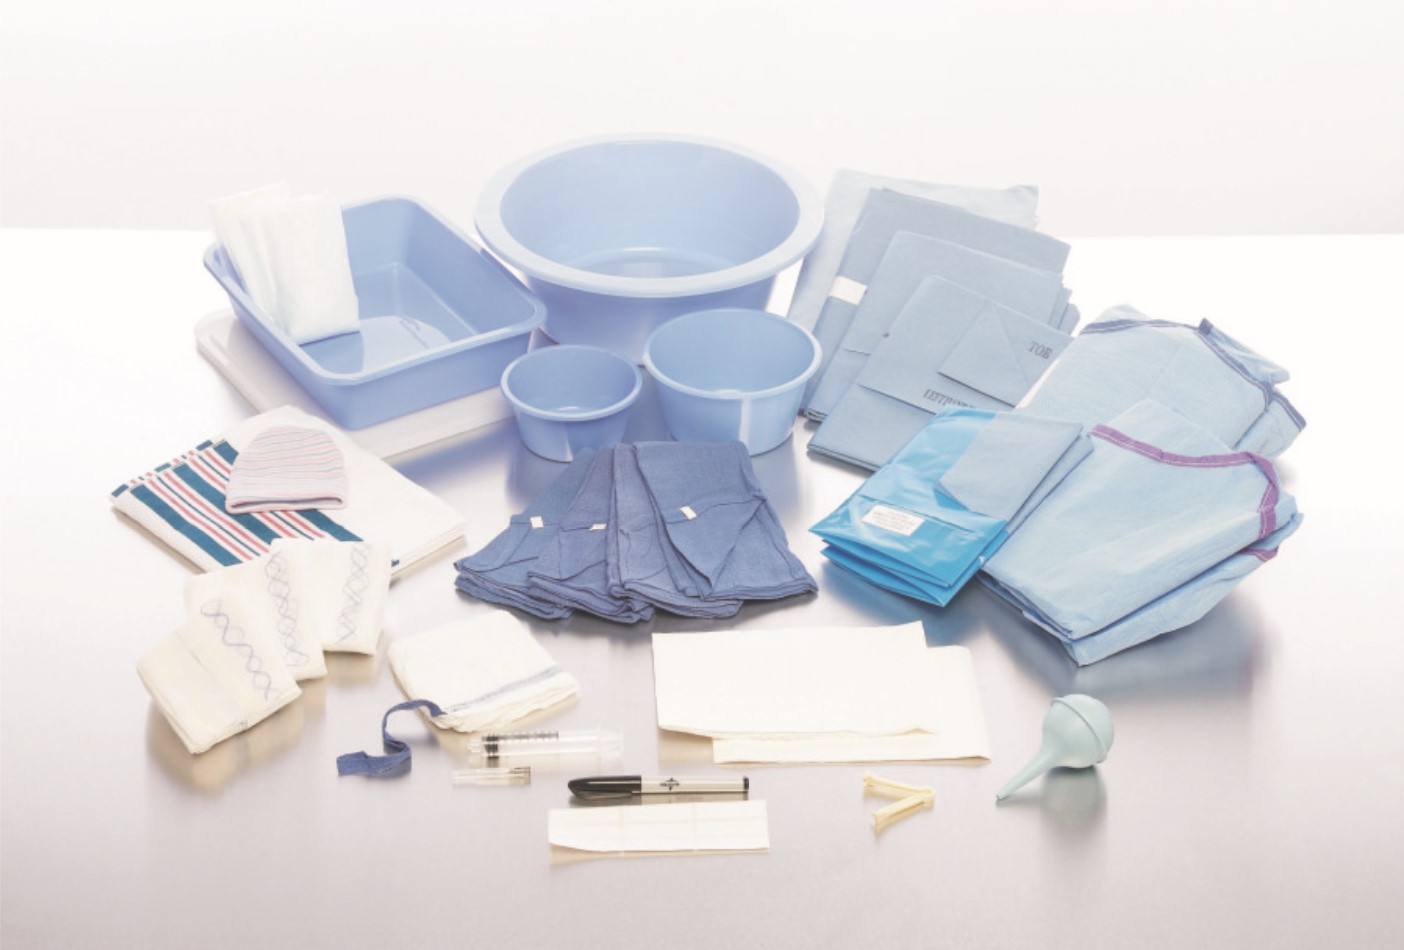 Disposable Sterile Delivery Surgical Pack